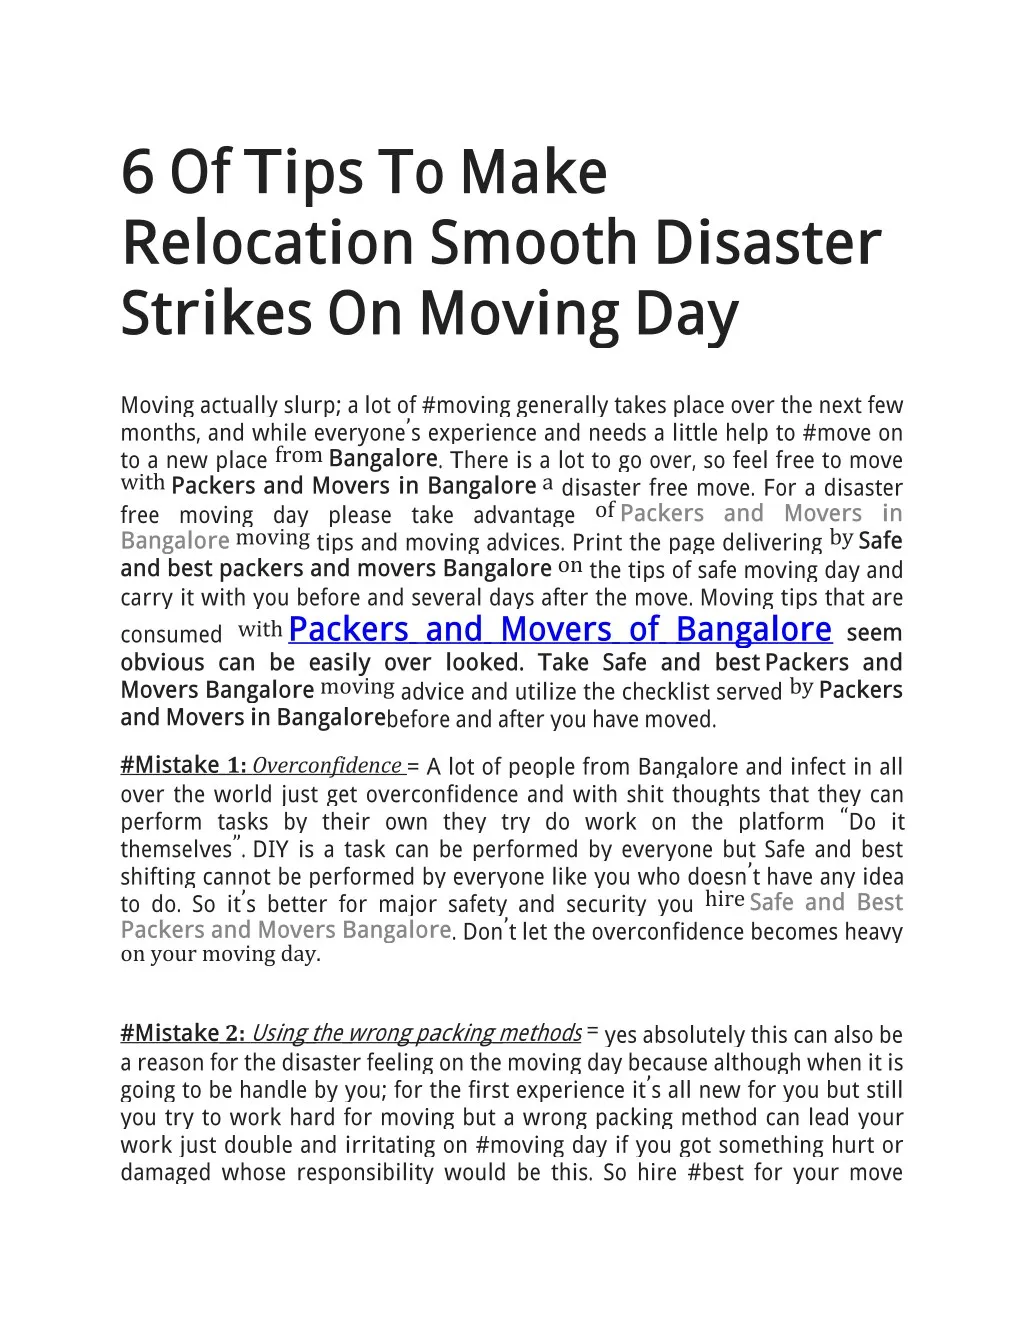 6 of tips to make relocation smooth disaster